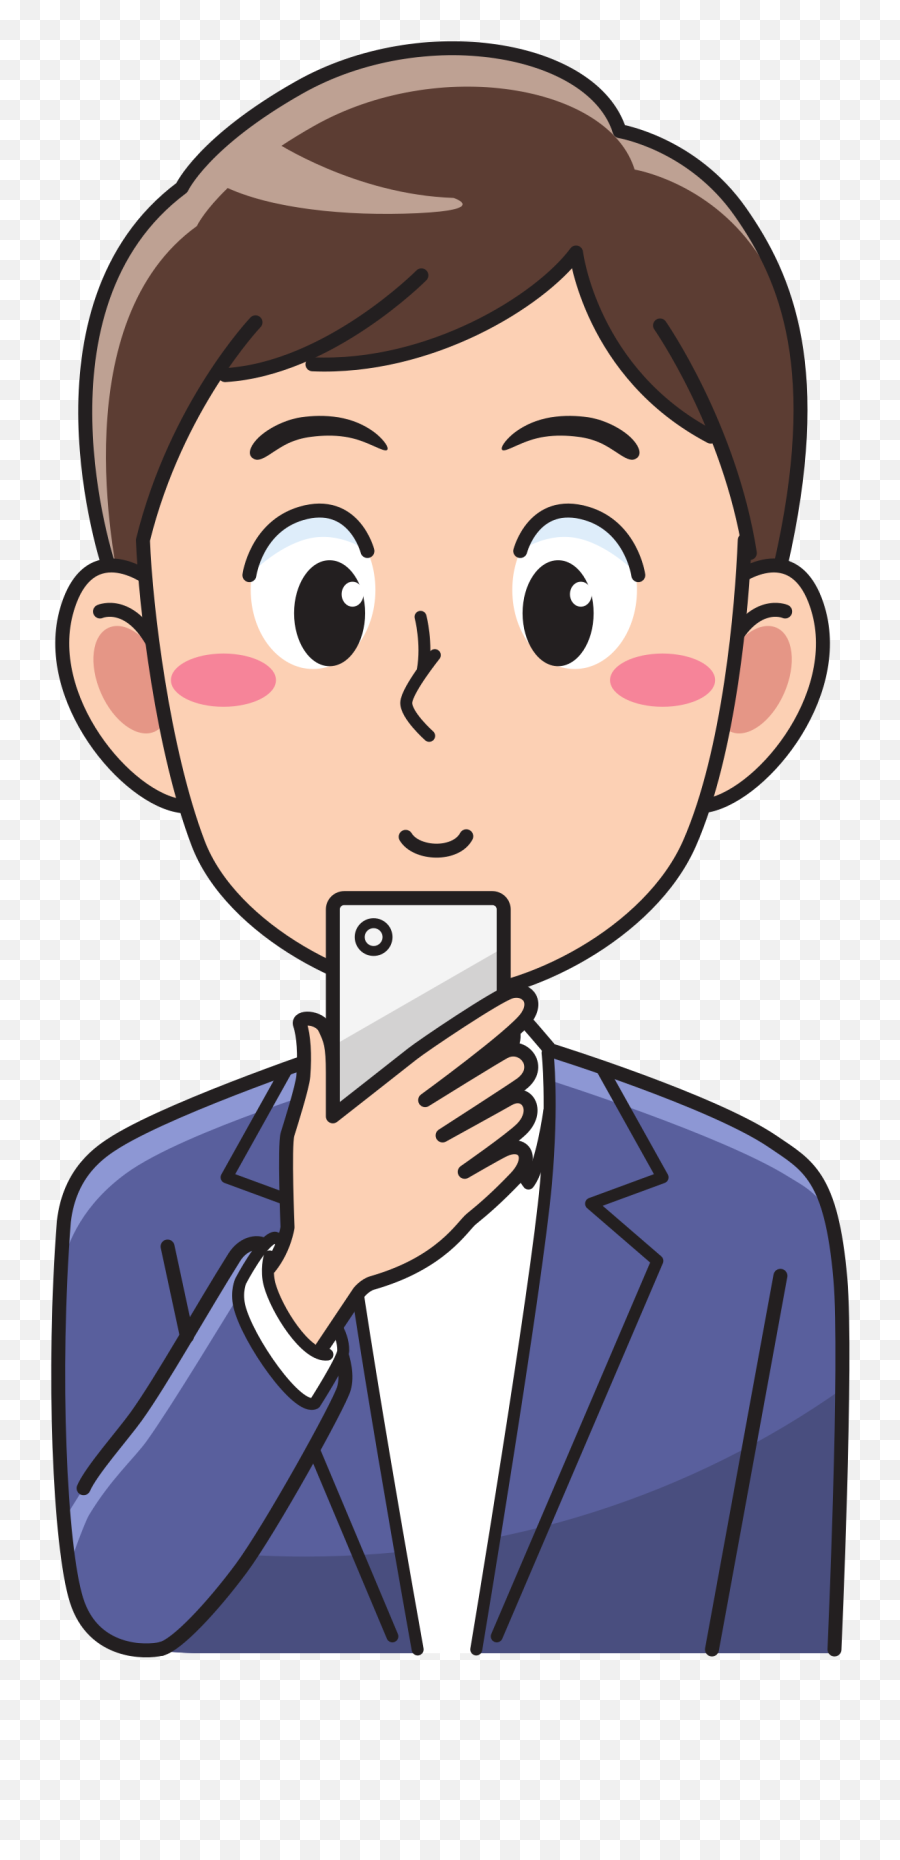 Download This Free Icons Png Design Of Man Using A - Man On Smartphone Clipart,Smartphone Icon Png